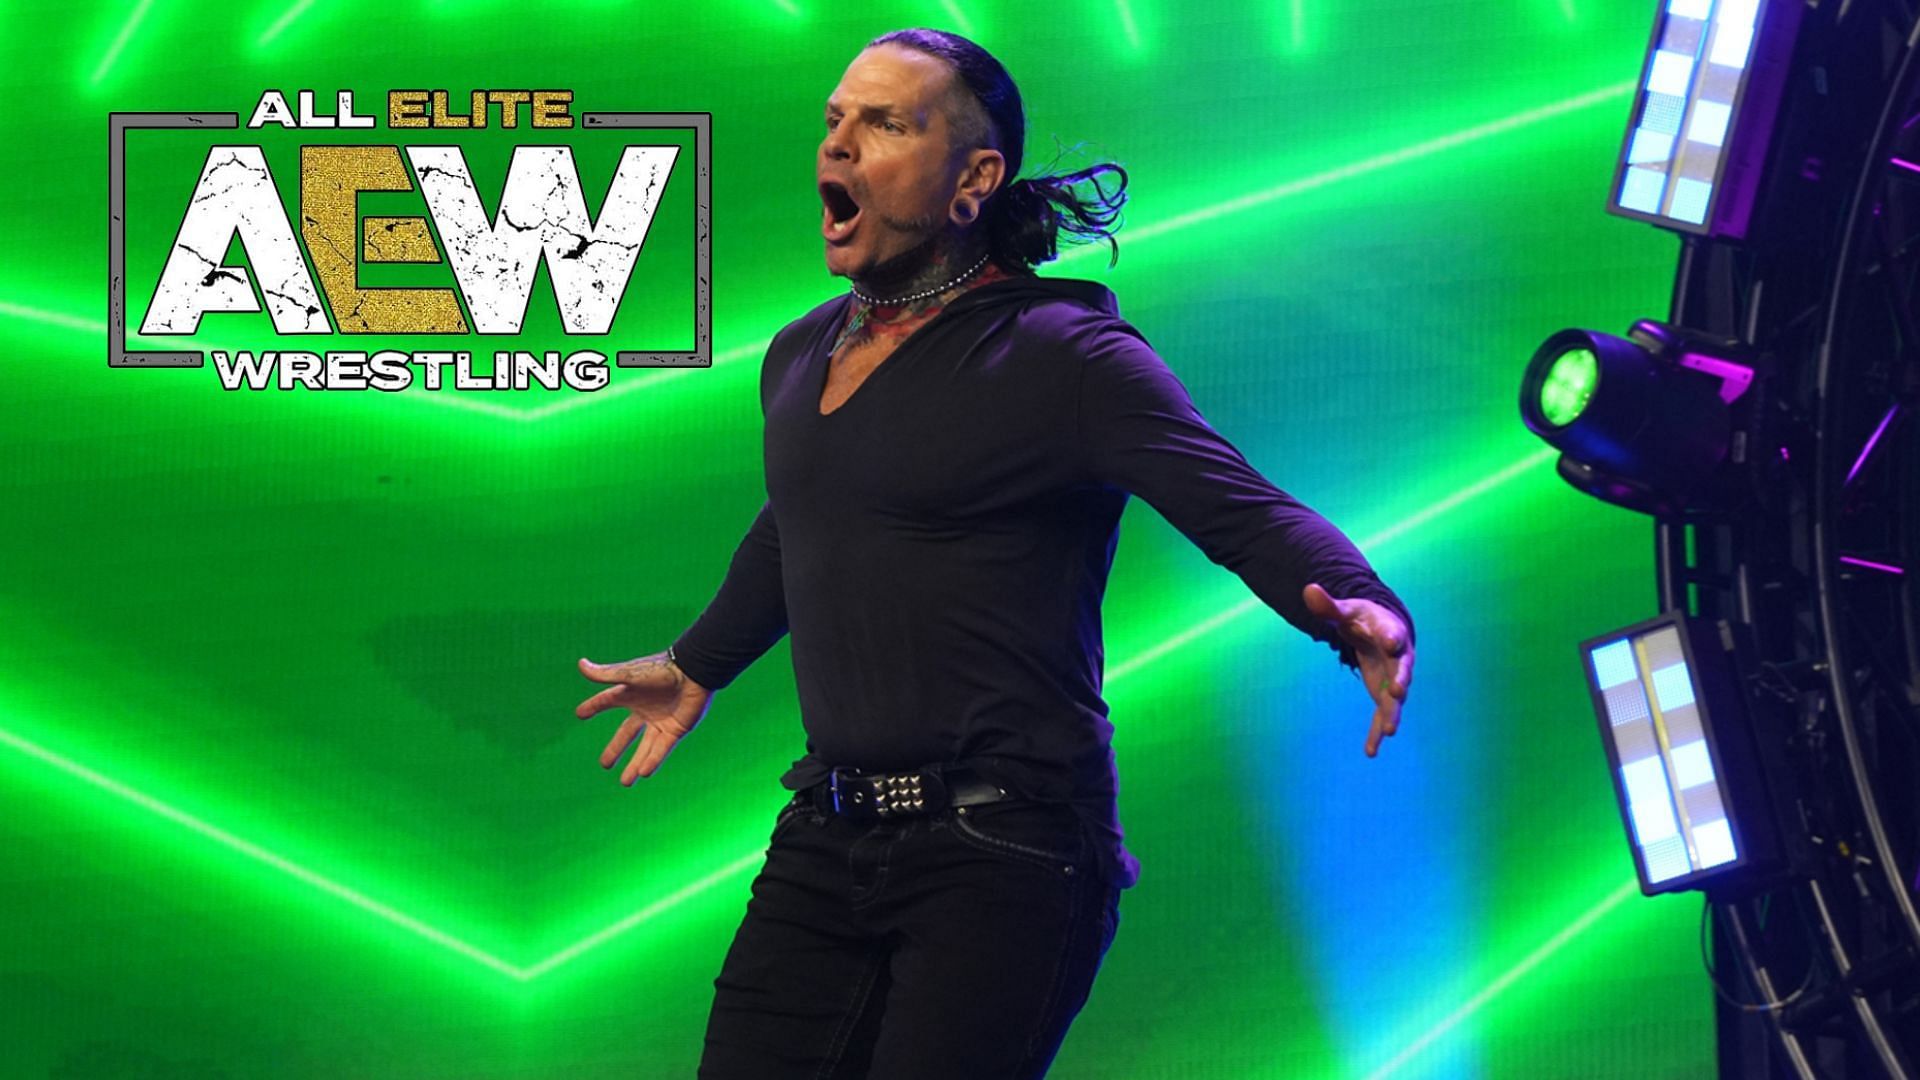 AEW star Jeff Hardy is still on the shelf due to a suspension from his legal issues.